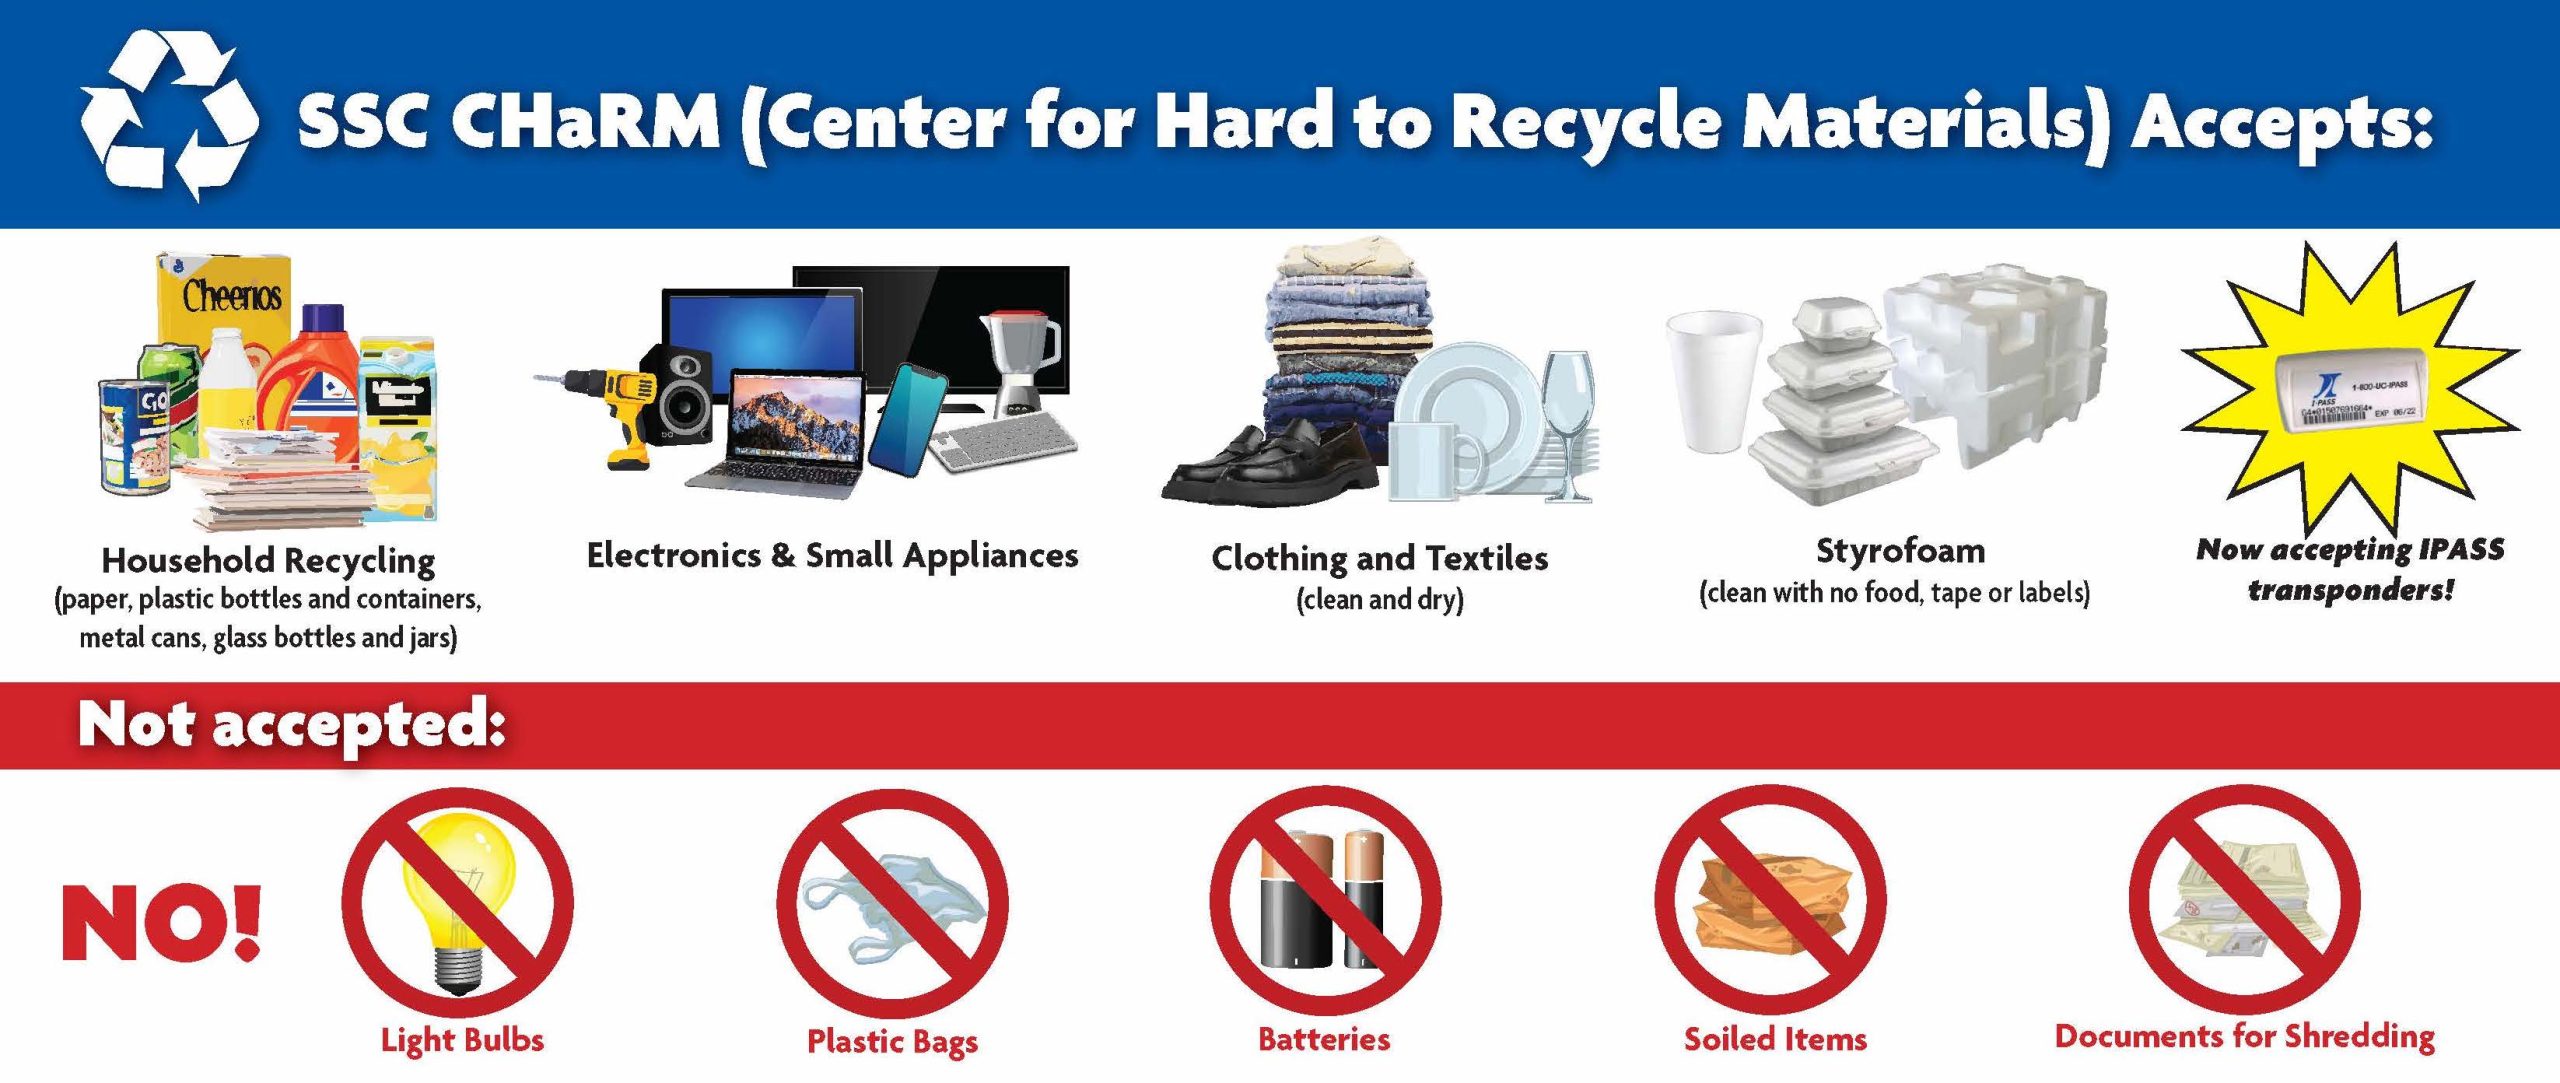 A graphic of acceptable and non-acceptable items at the SSC Center for Hard to Recycle Materials.